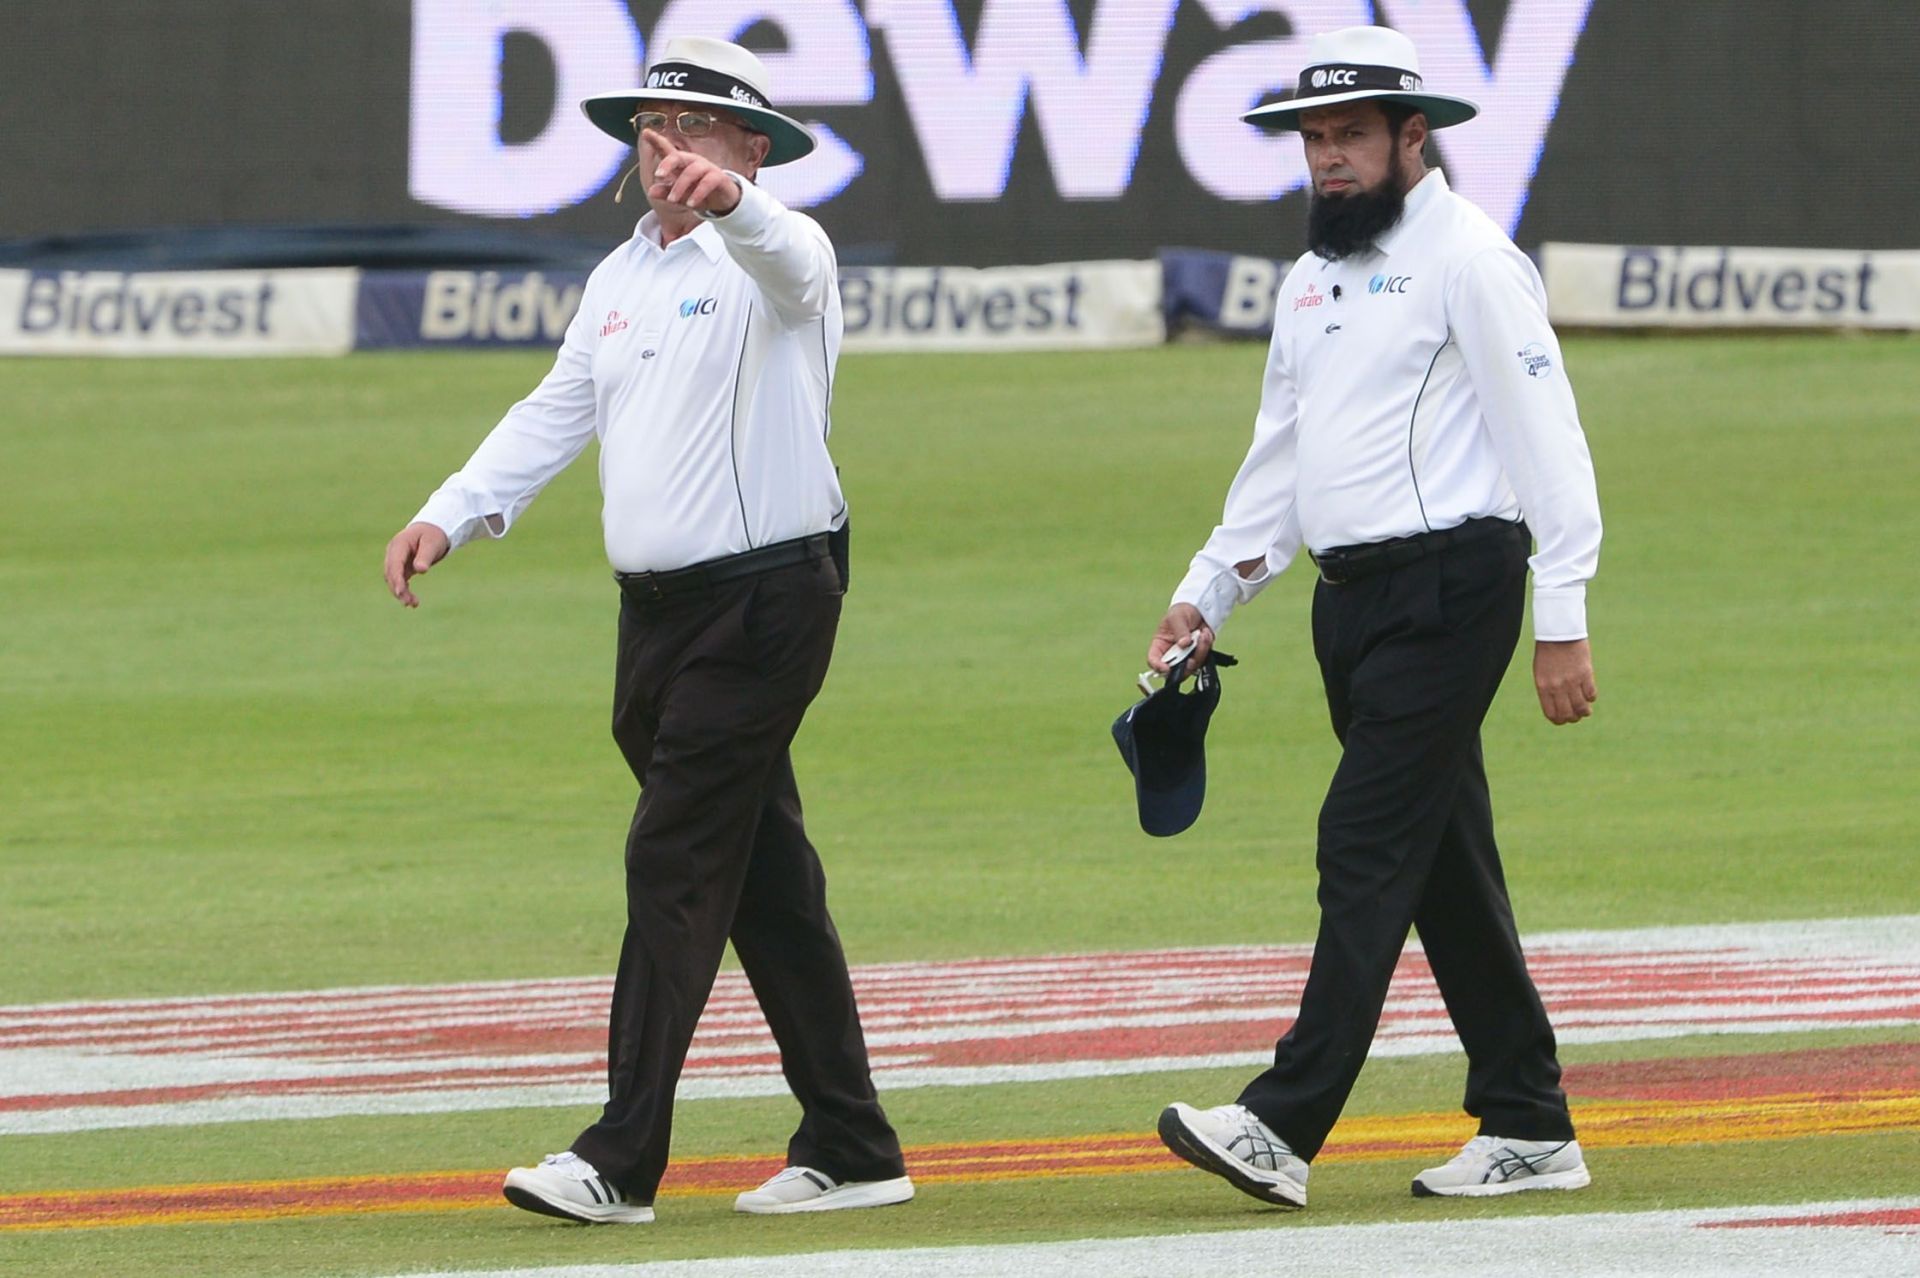 India, like almost every other team, have had their issues with umpires, especially in Test matches.